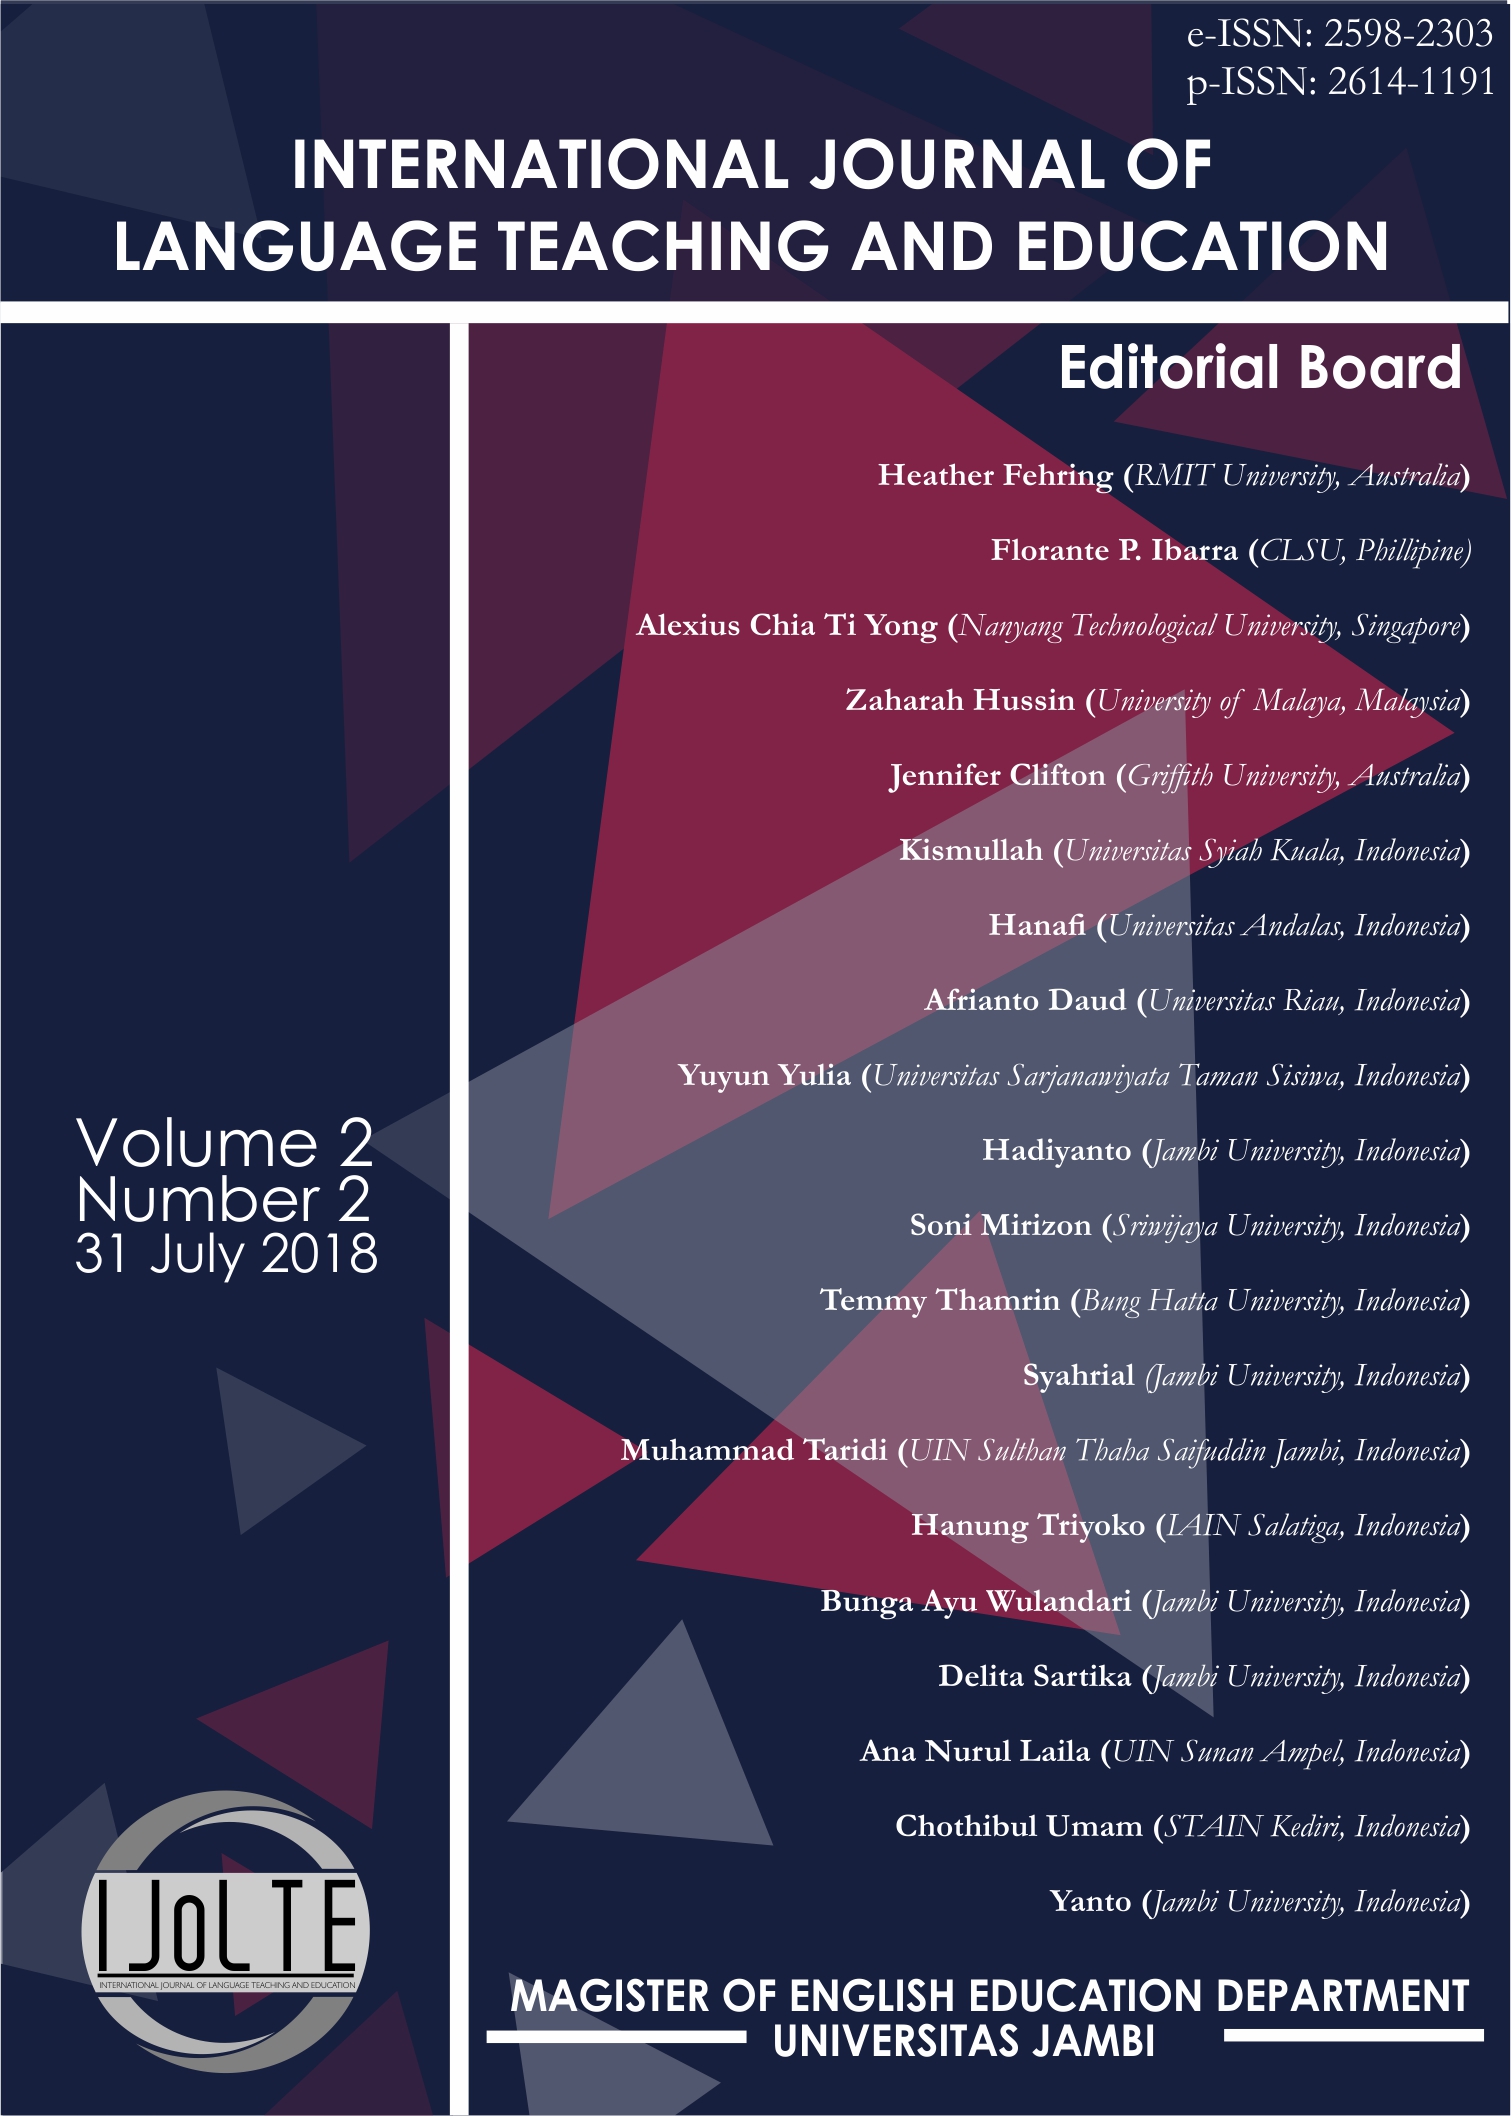 					View Vol. 2 No. 2 (2018): VOLUME 2, Number (Issue) 2, July 2018
				